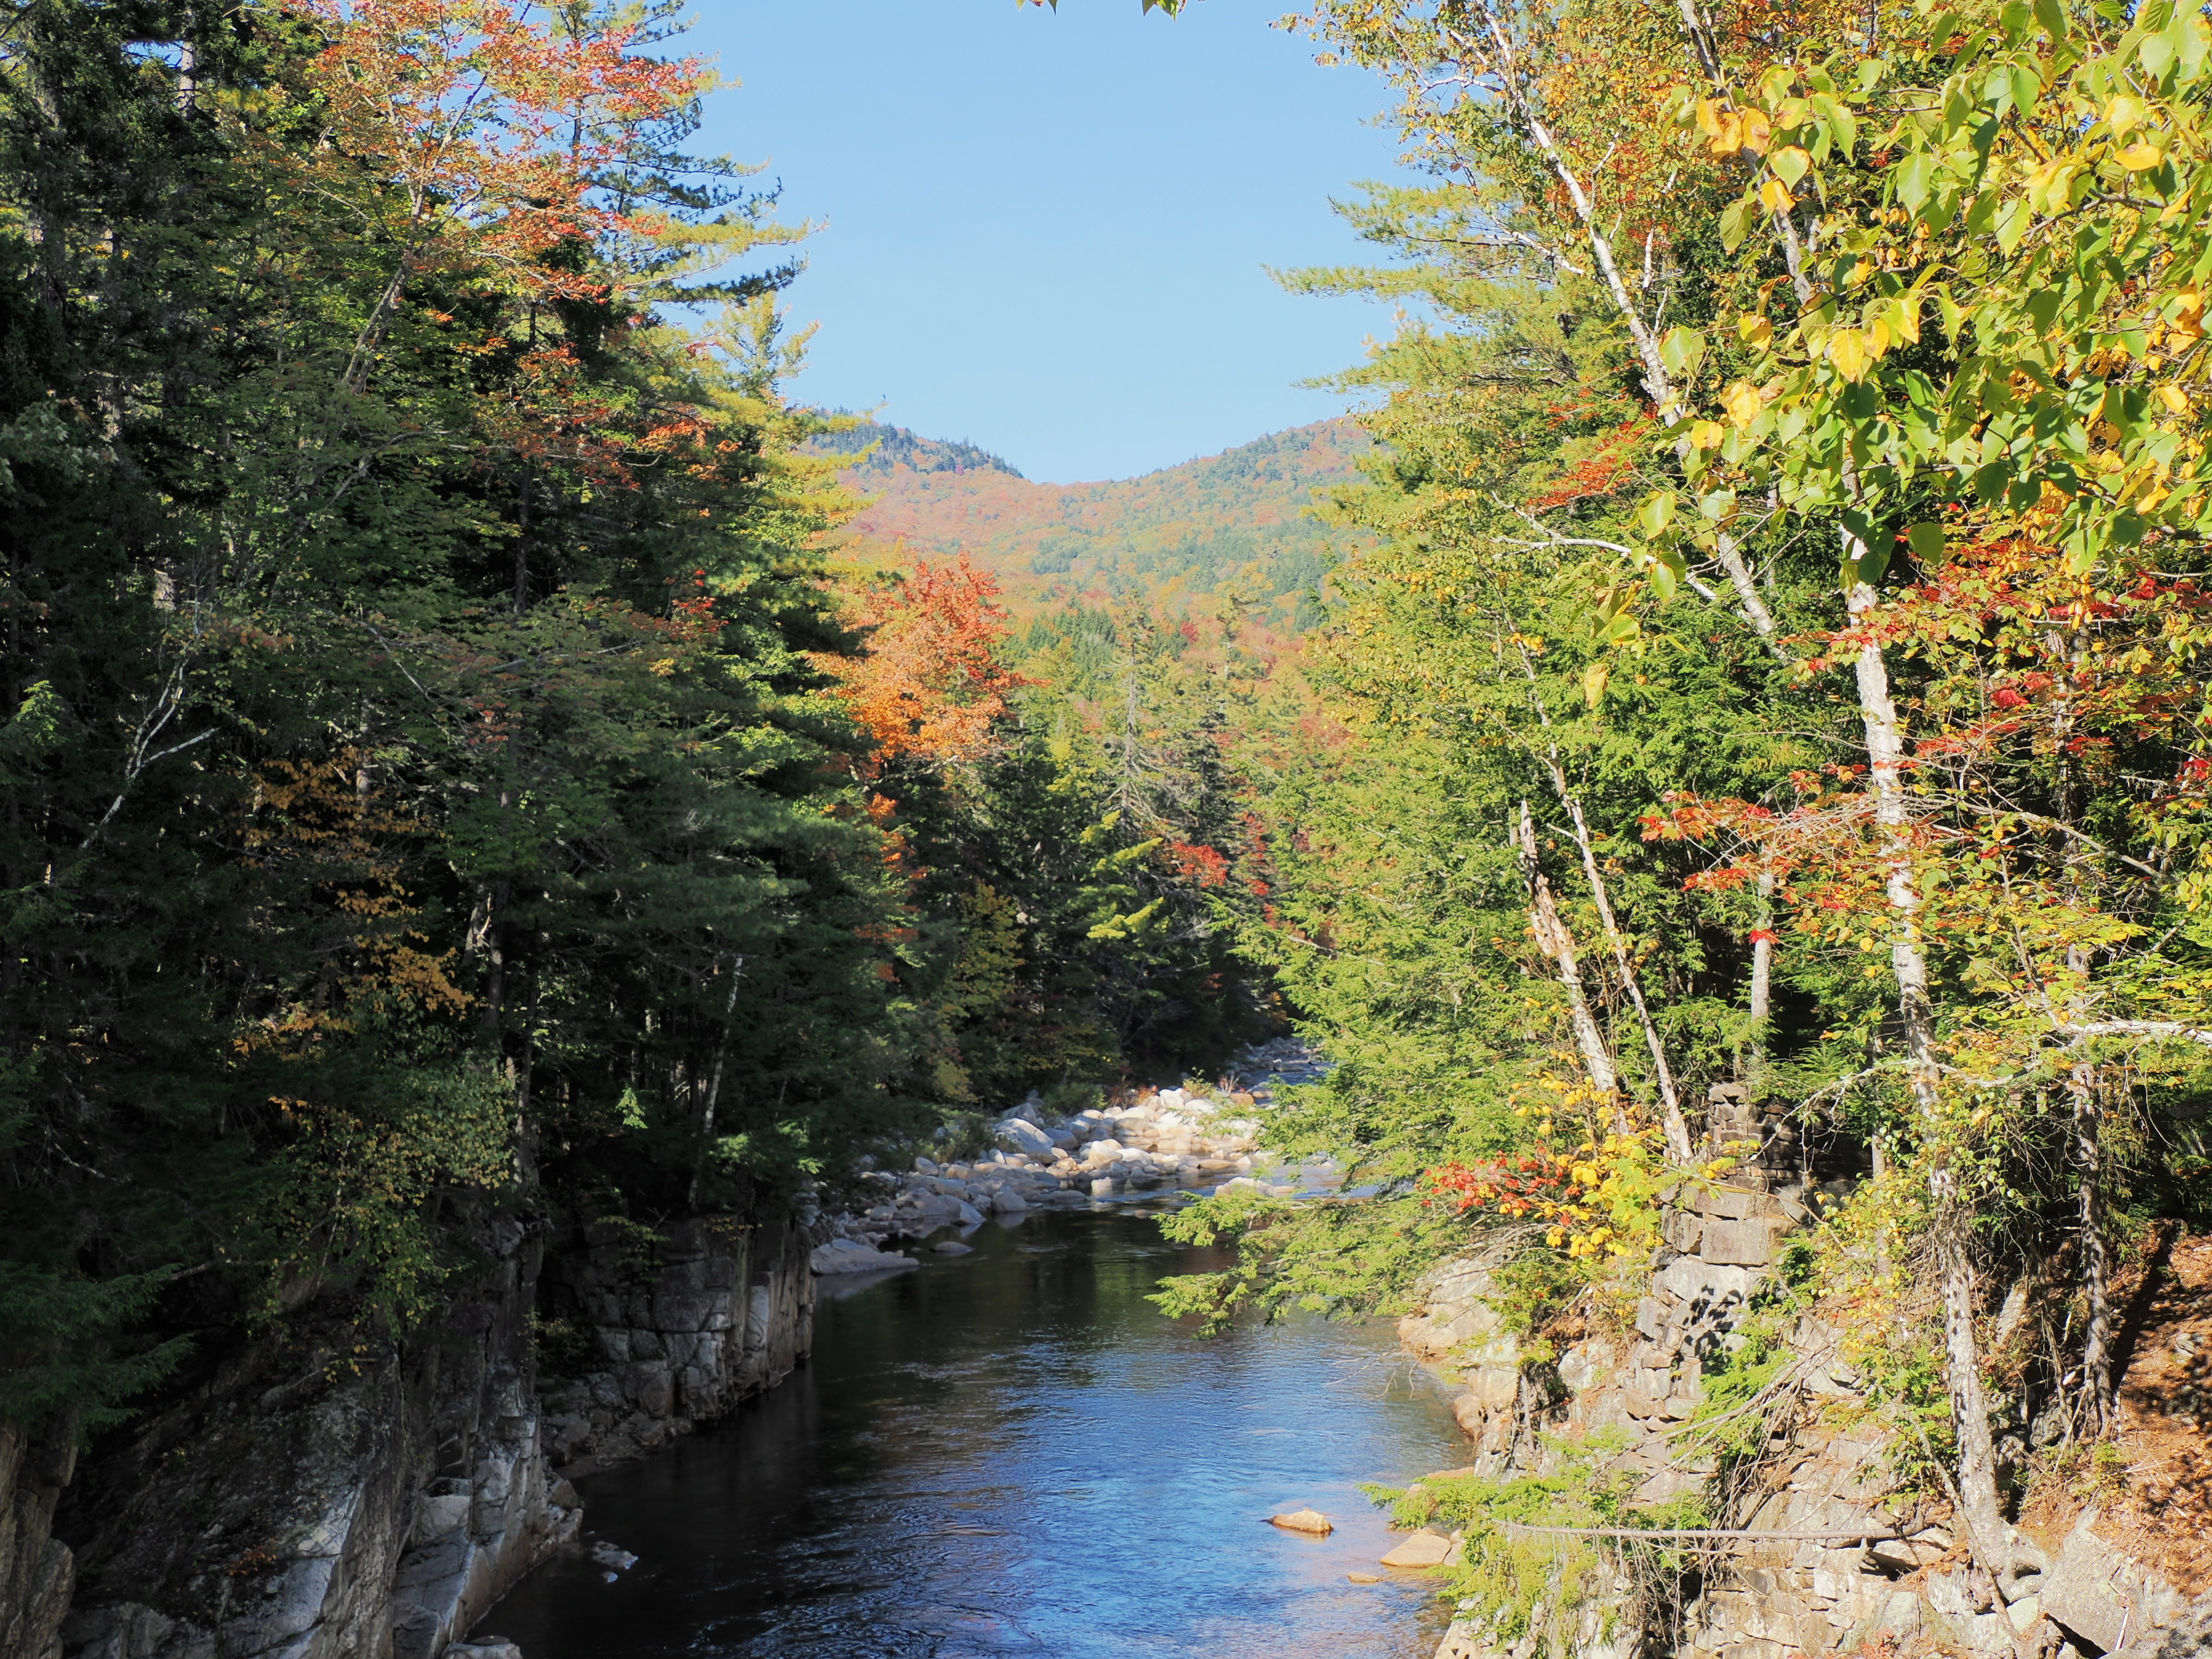 Lower Falls scenic area on the Kancamagus highway #4